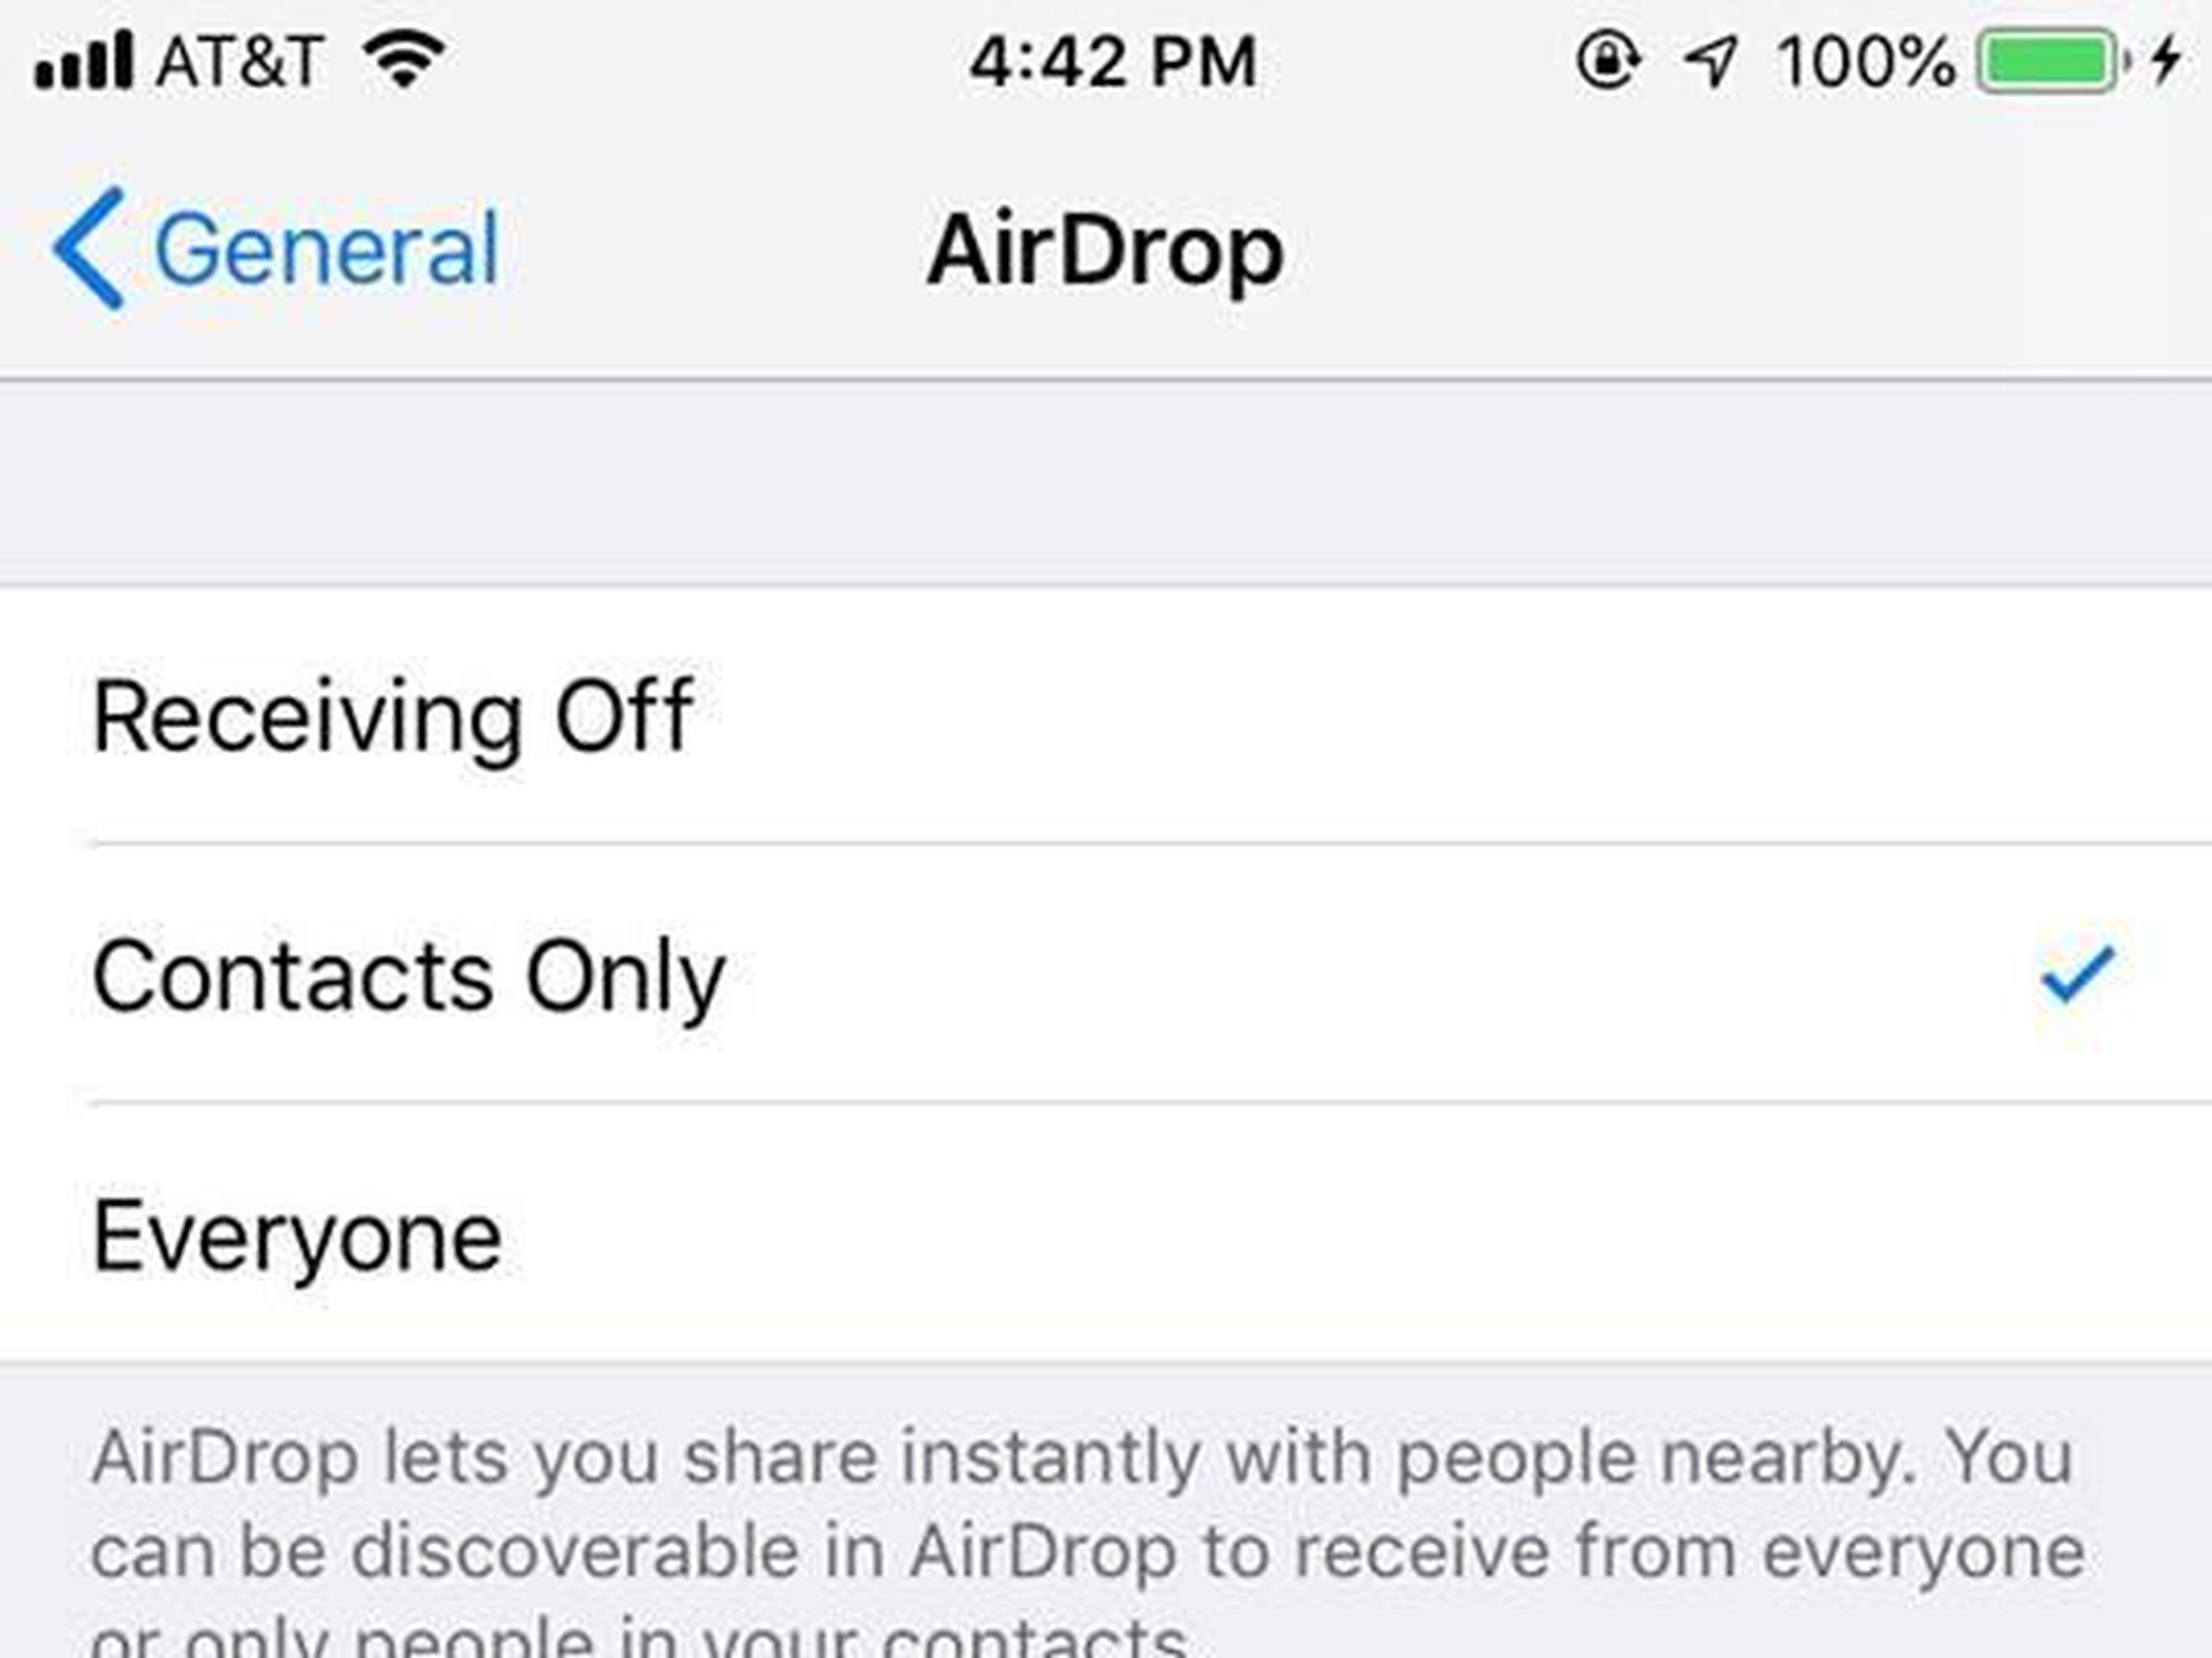 People are using Apple's AirDrop feature to send gross, explicit pictures to strangers — but there's a simple fix to protect yourself